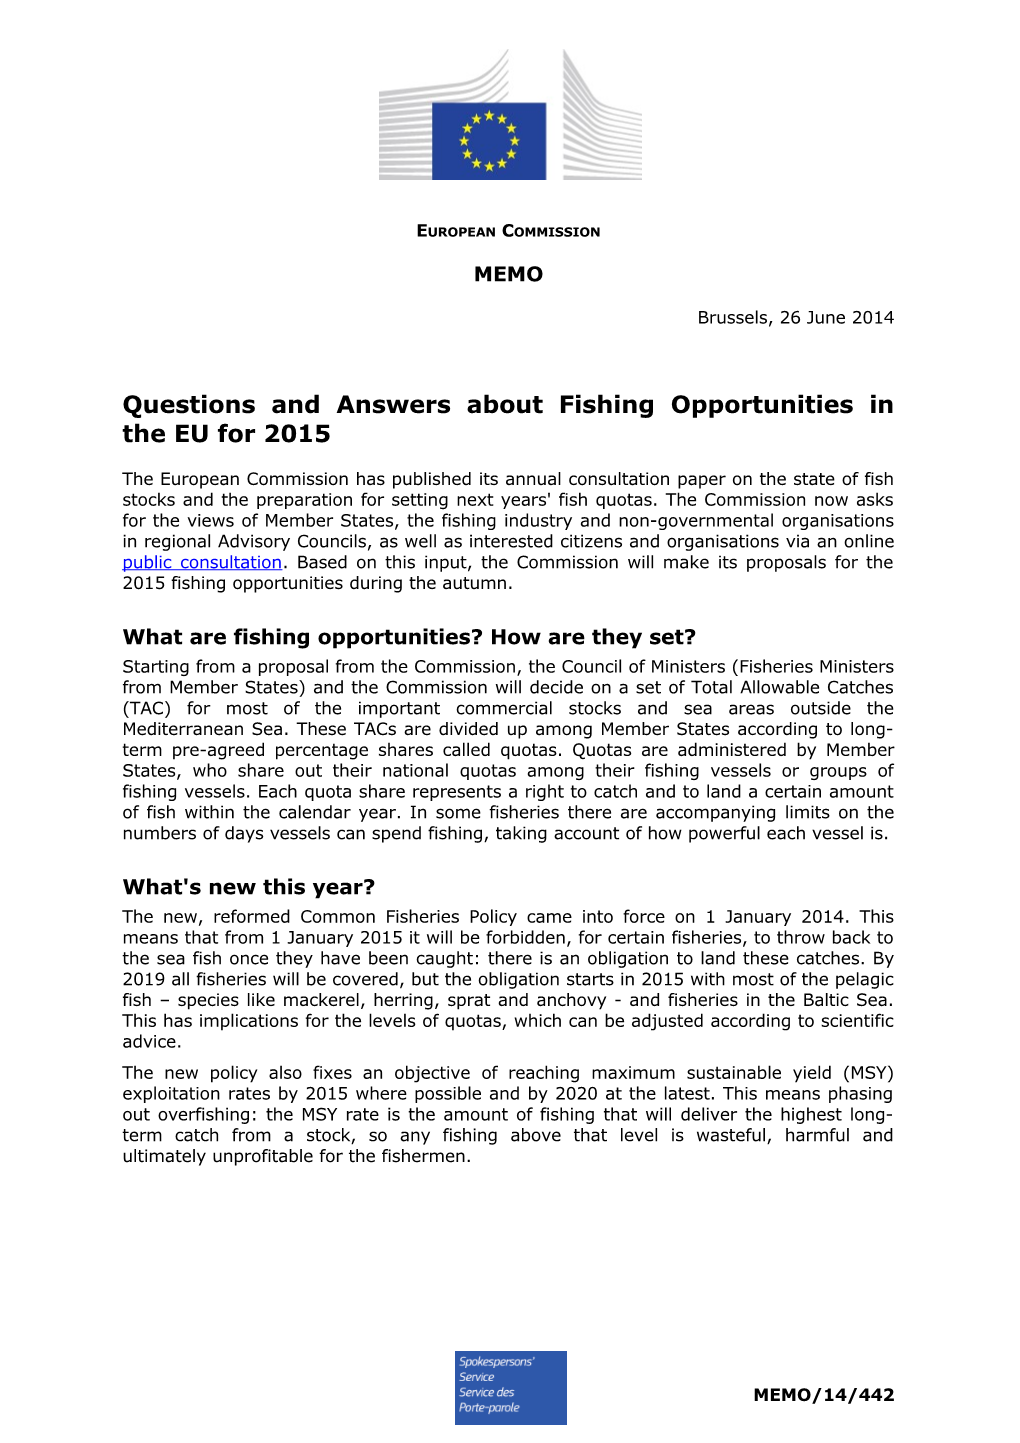 Questions and Answers About Fishing Opportunities in the EU for 2015